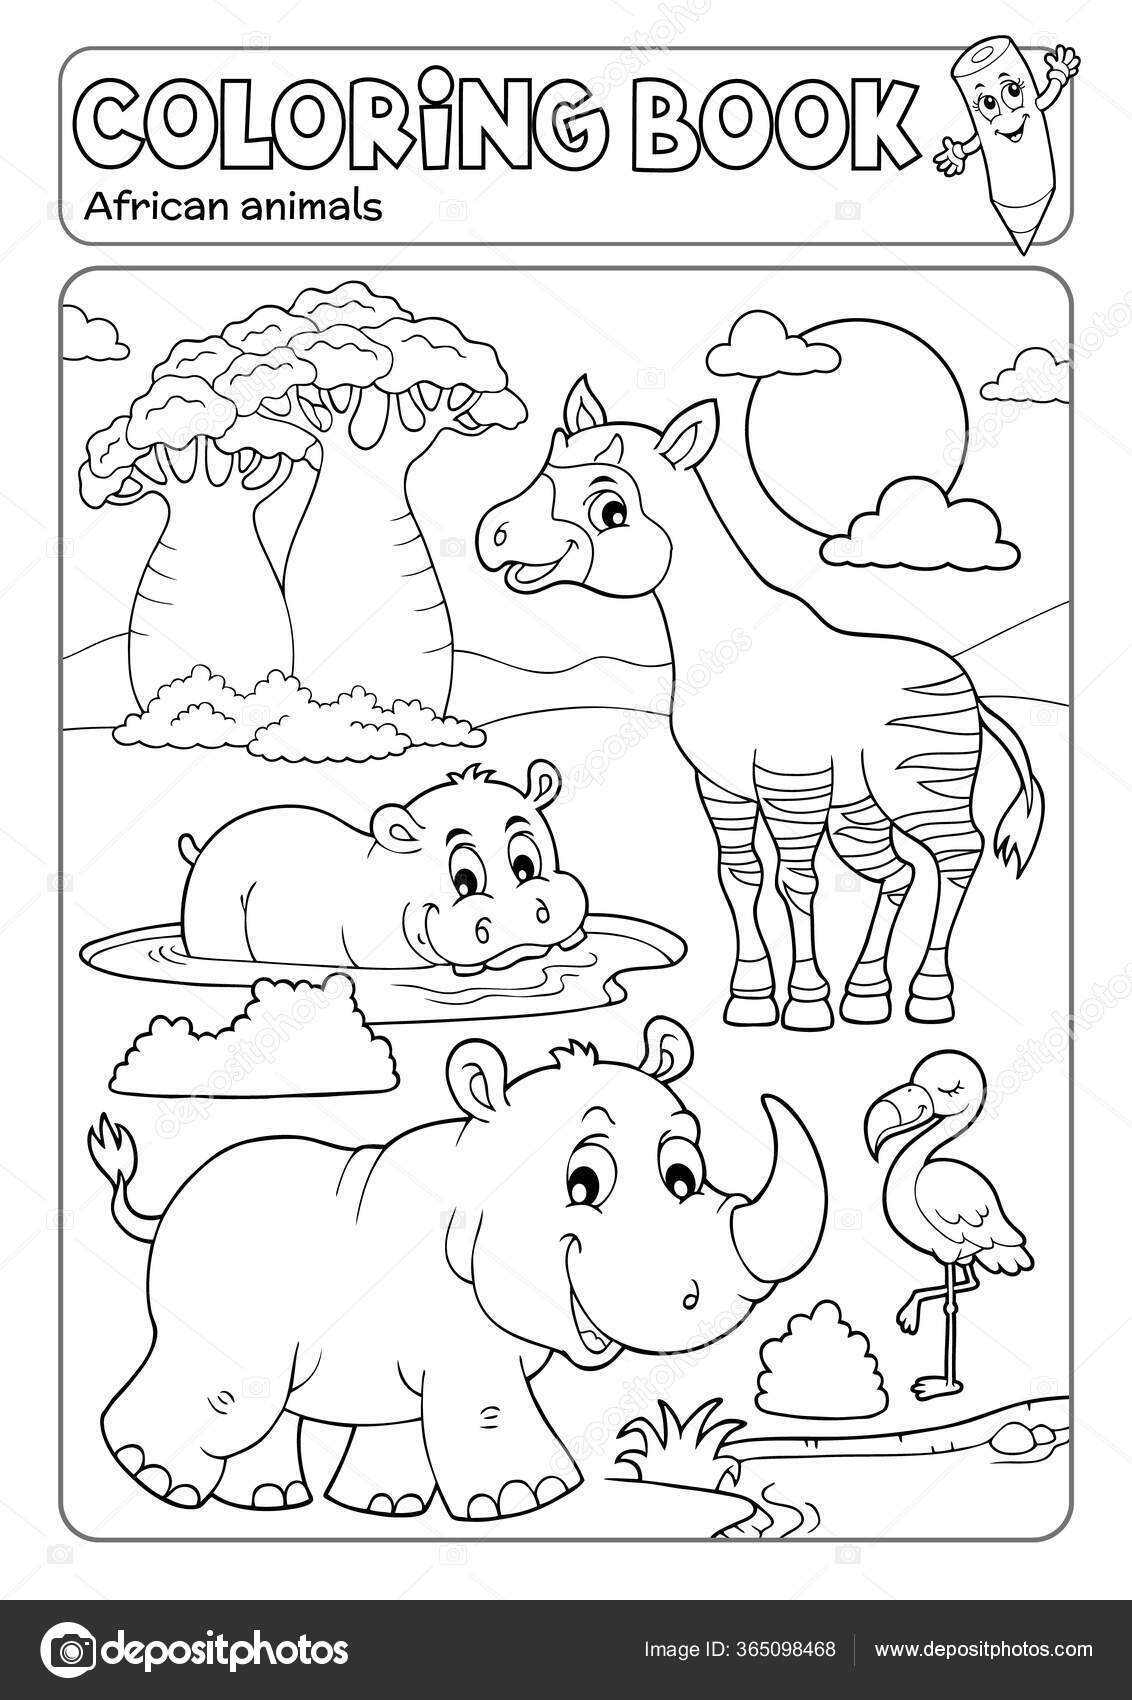 Download Coloring Book African Fauna Eps10 Vector Illustration Stock Vector Royalty Free Vector Image By C Clairev 365098468